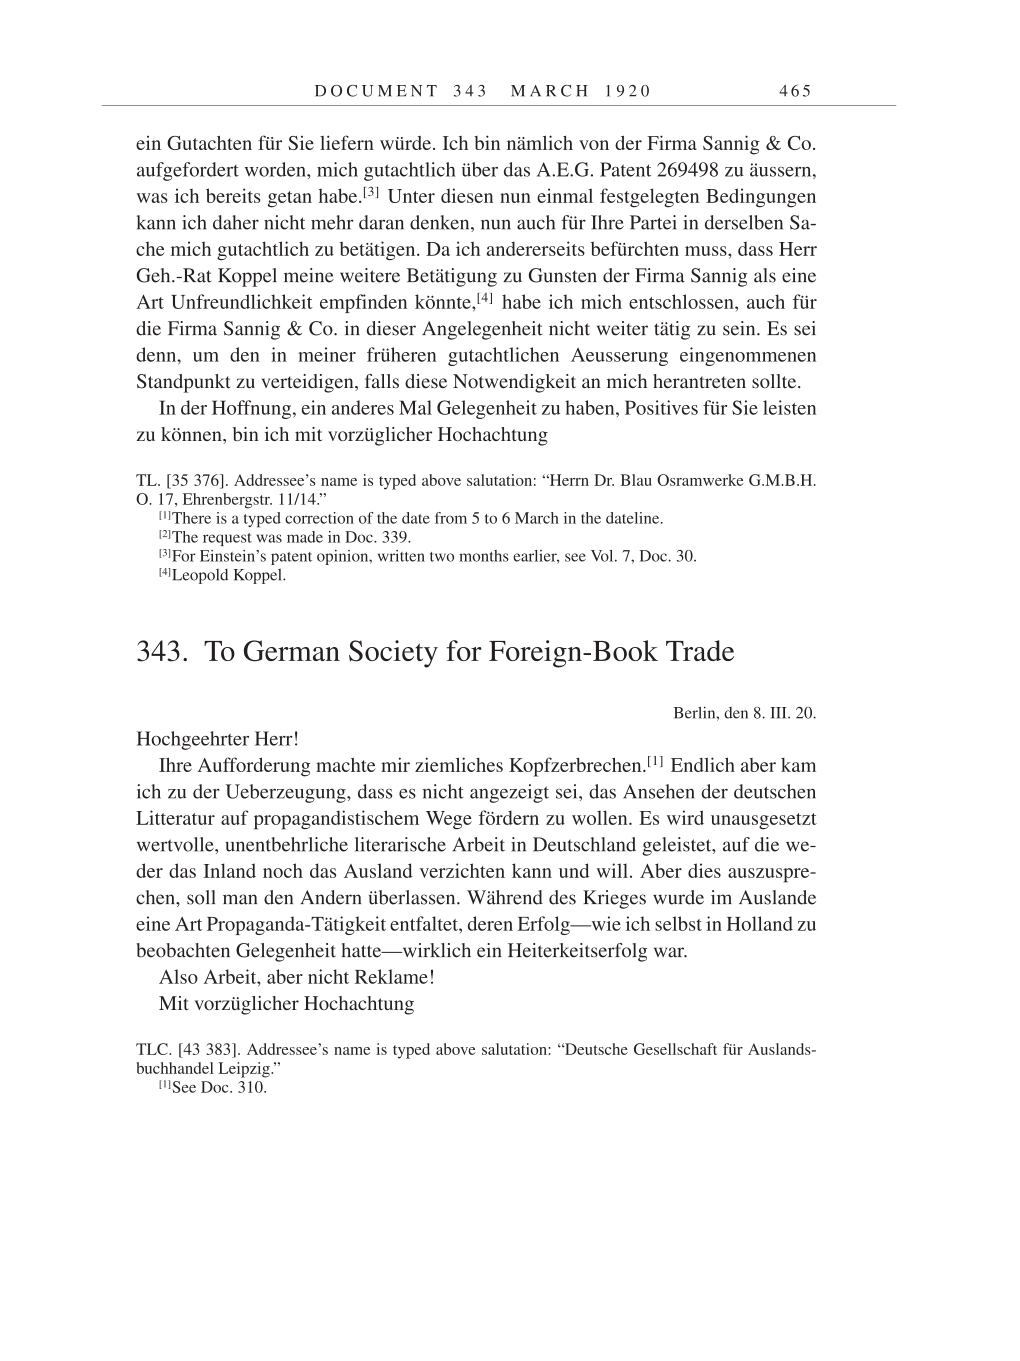 Volume 9: The Berlin Years: Correspondence January 1919-April 1920 page 465